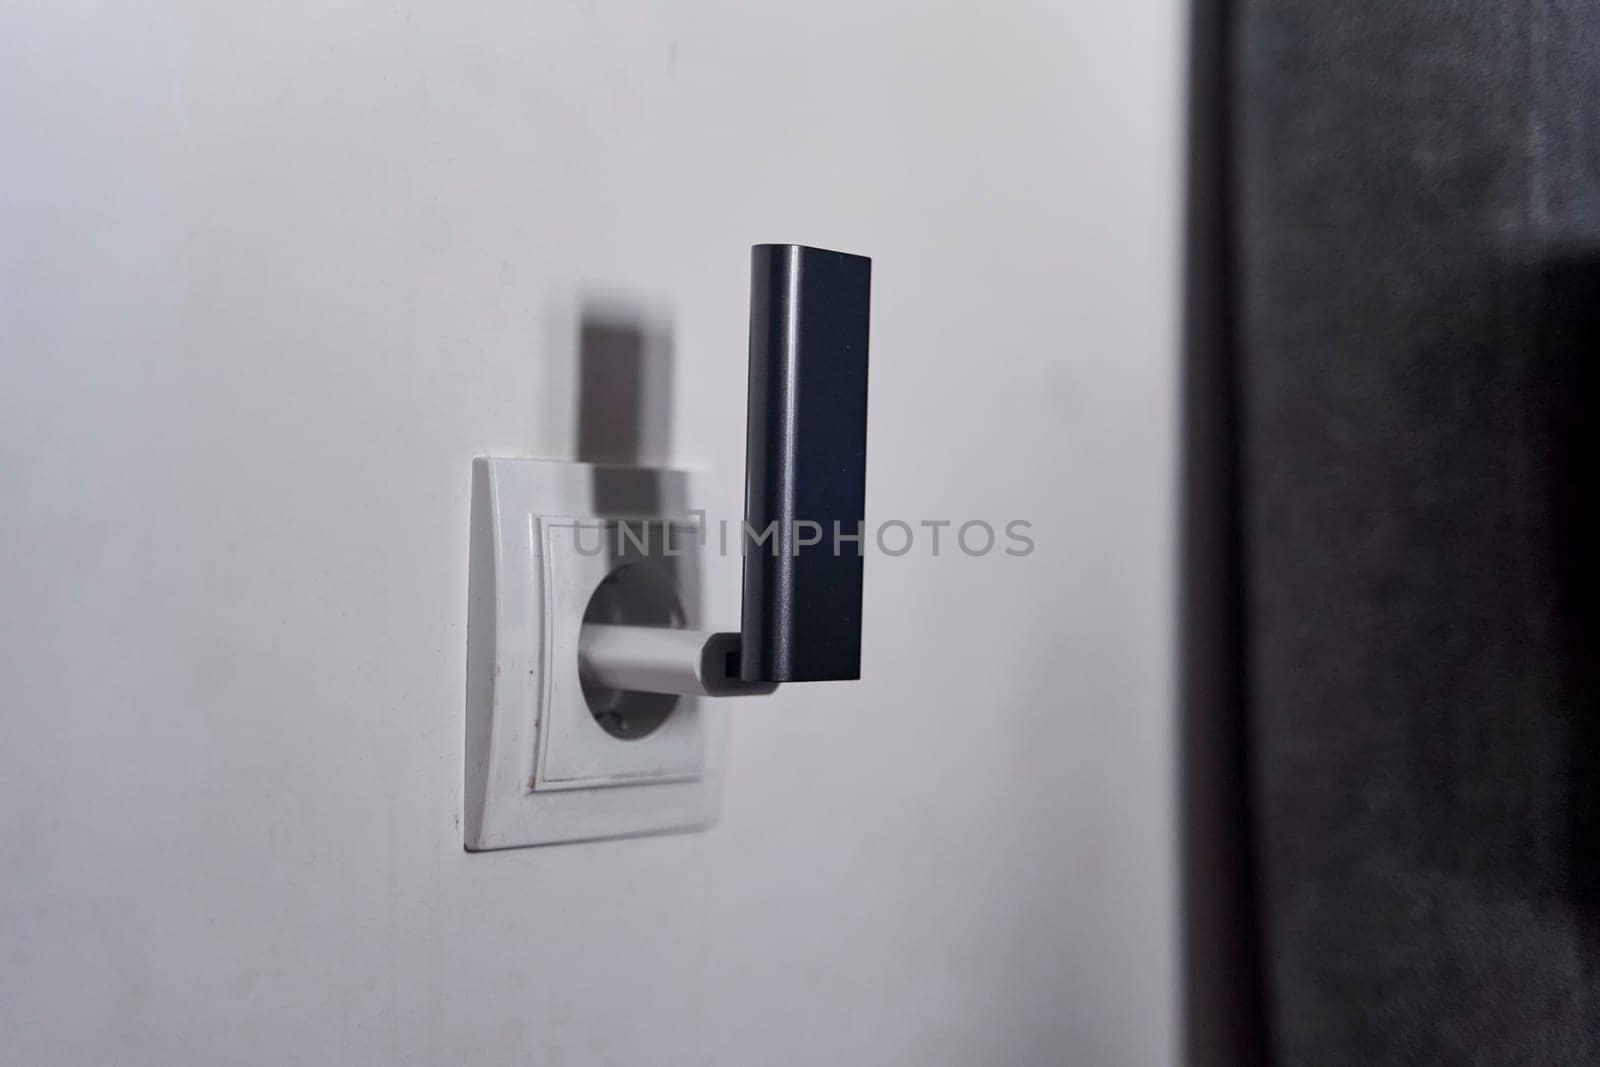 A black wi-fi router is plugged into a white electrical outlet on a grey wall in an art room, near a wooden door with a silver door handle